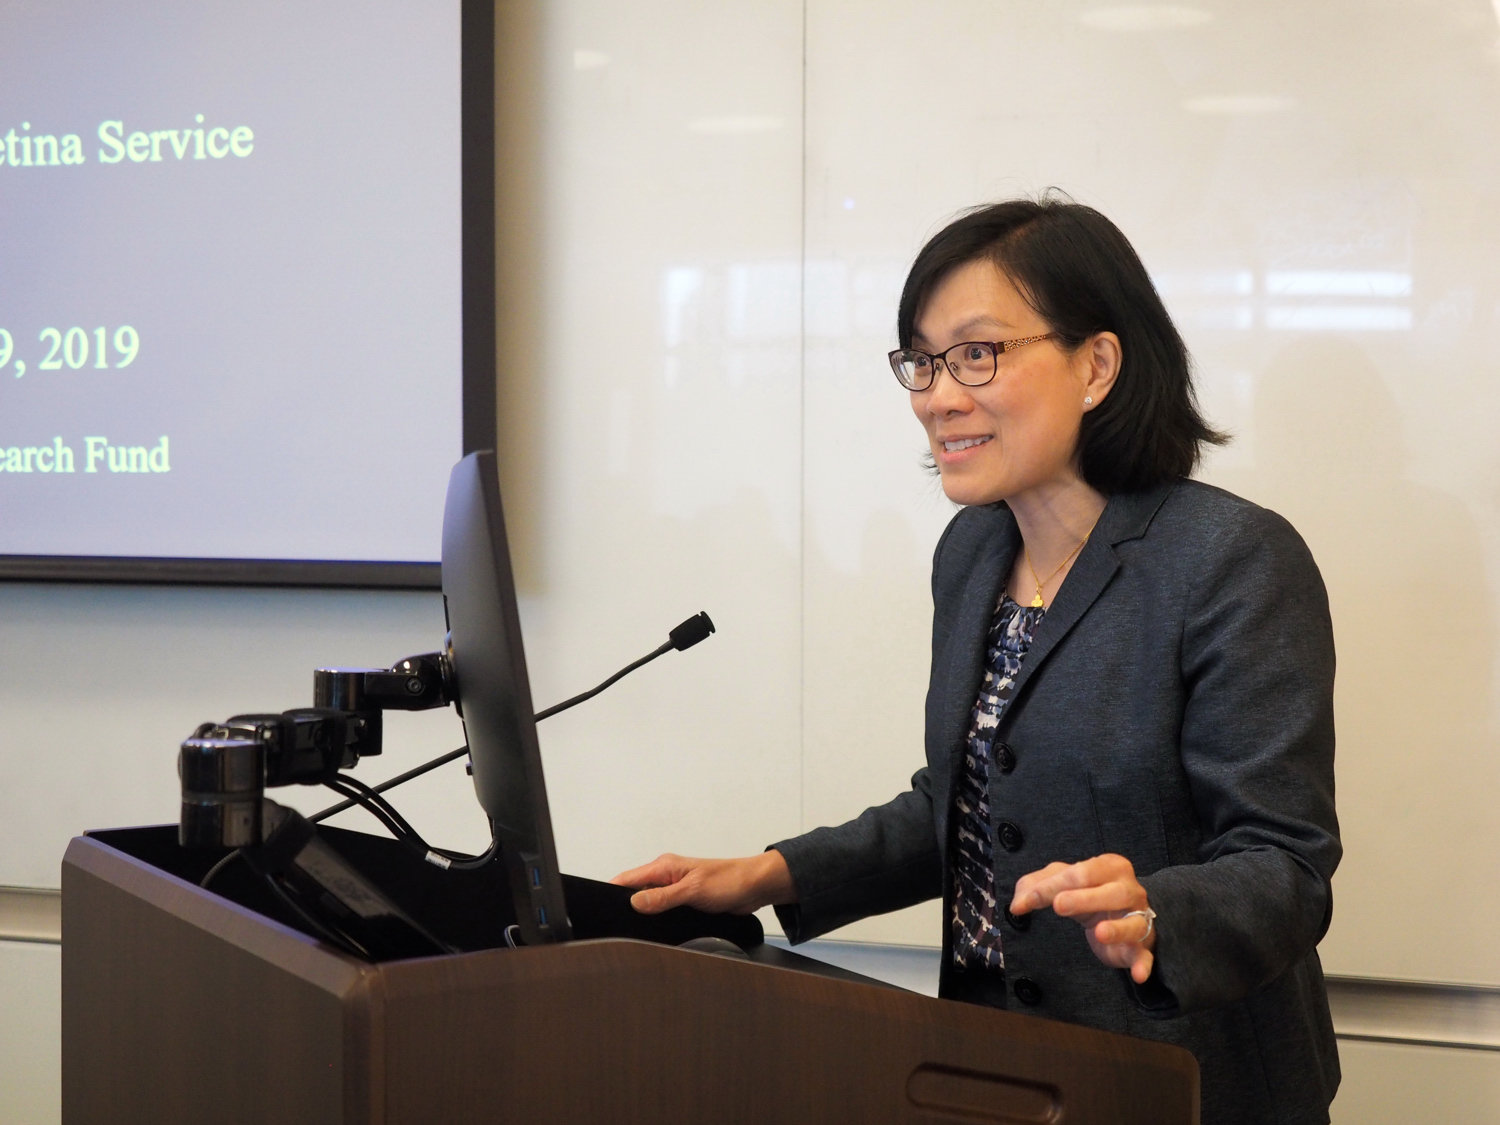 Dr. Jennifer Lim Opens the New Academic Yearâ€™s Vision